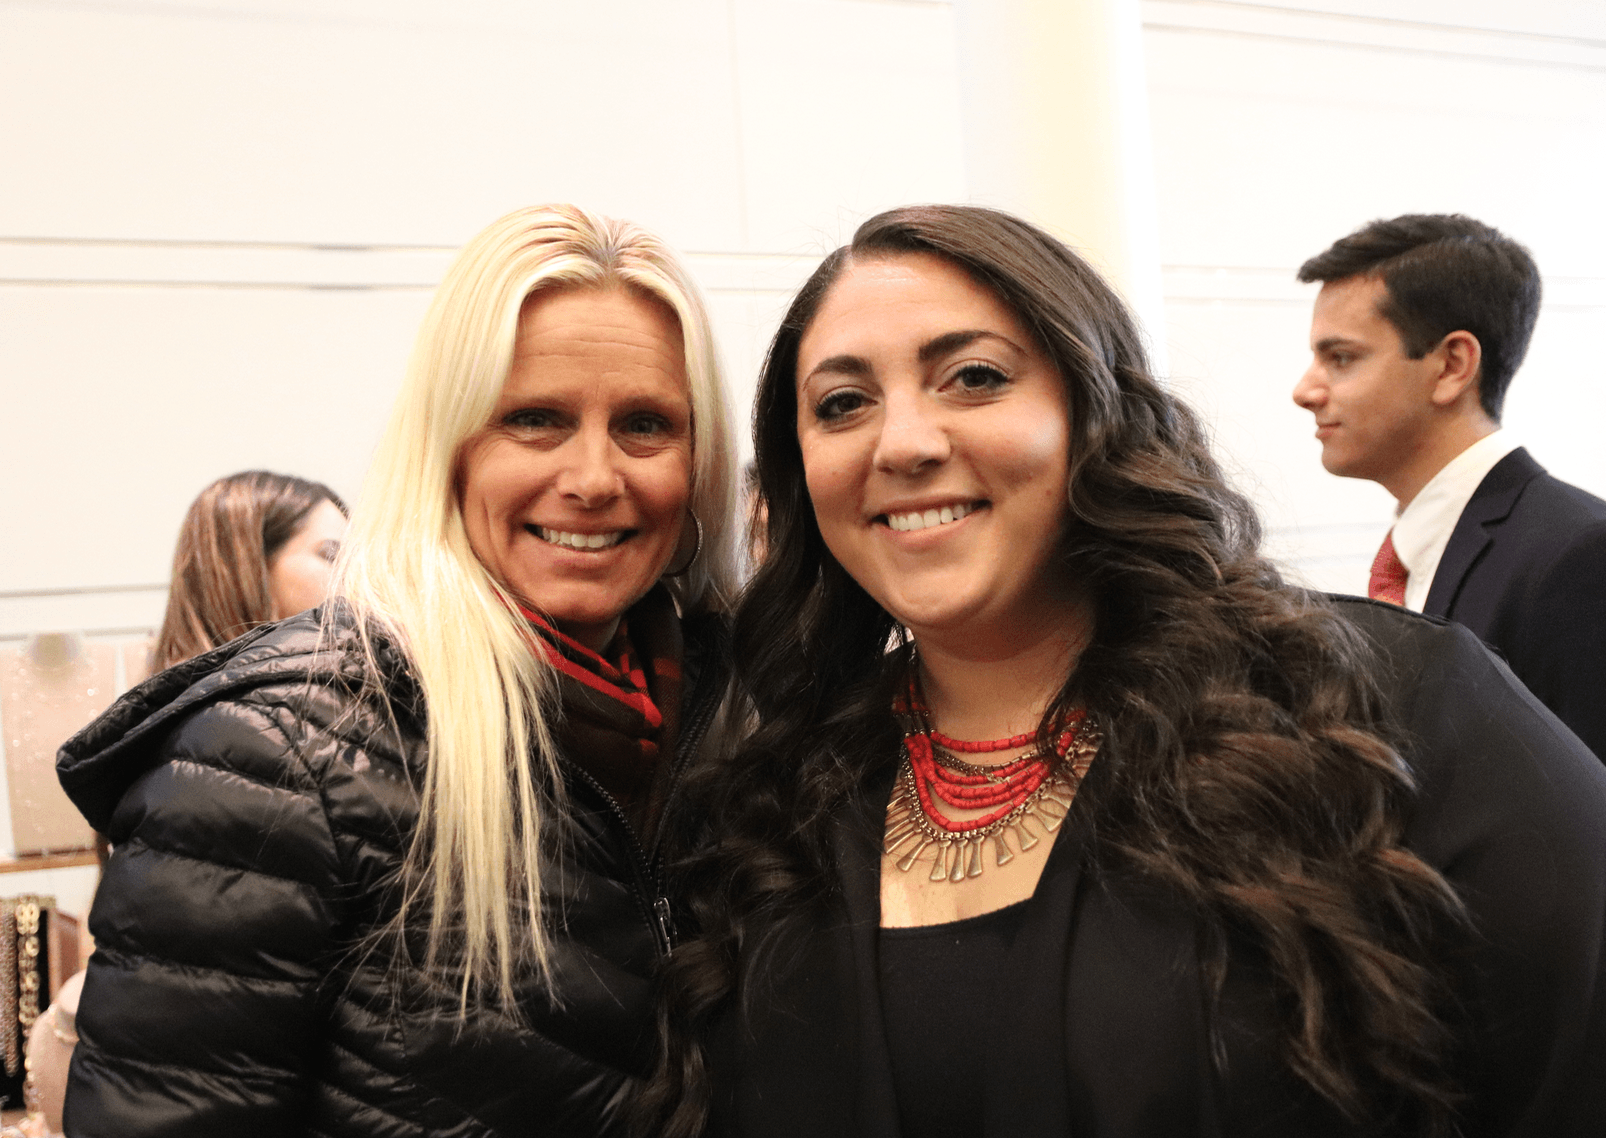 Terry Smith and Erin Montague at the Cheerleaders fashion show fundraiser. Nov 9, 2019 Photo: Leslie Yager